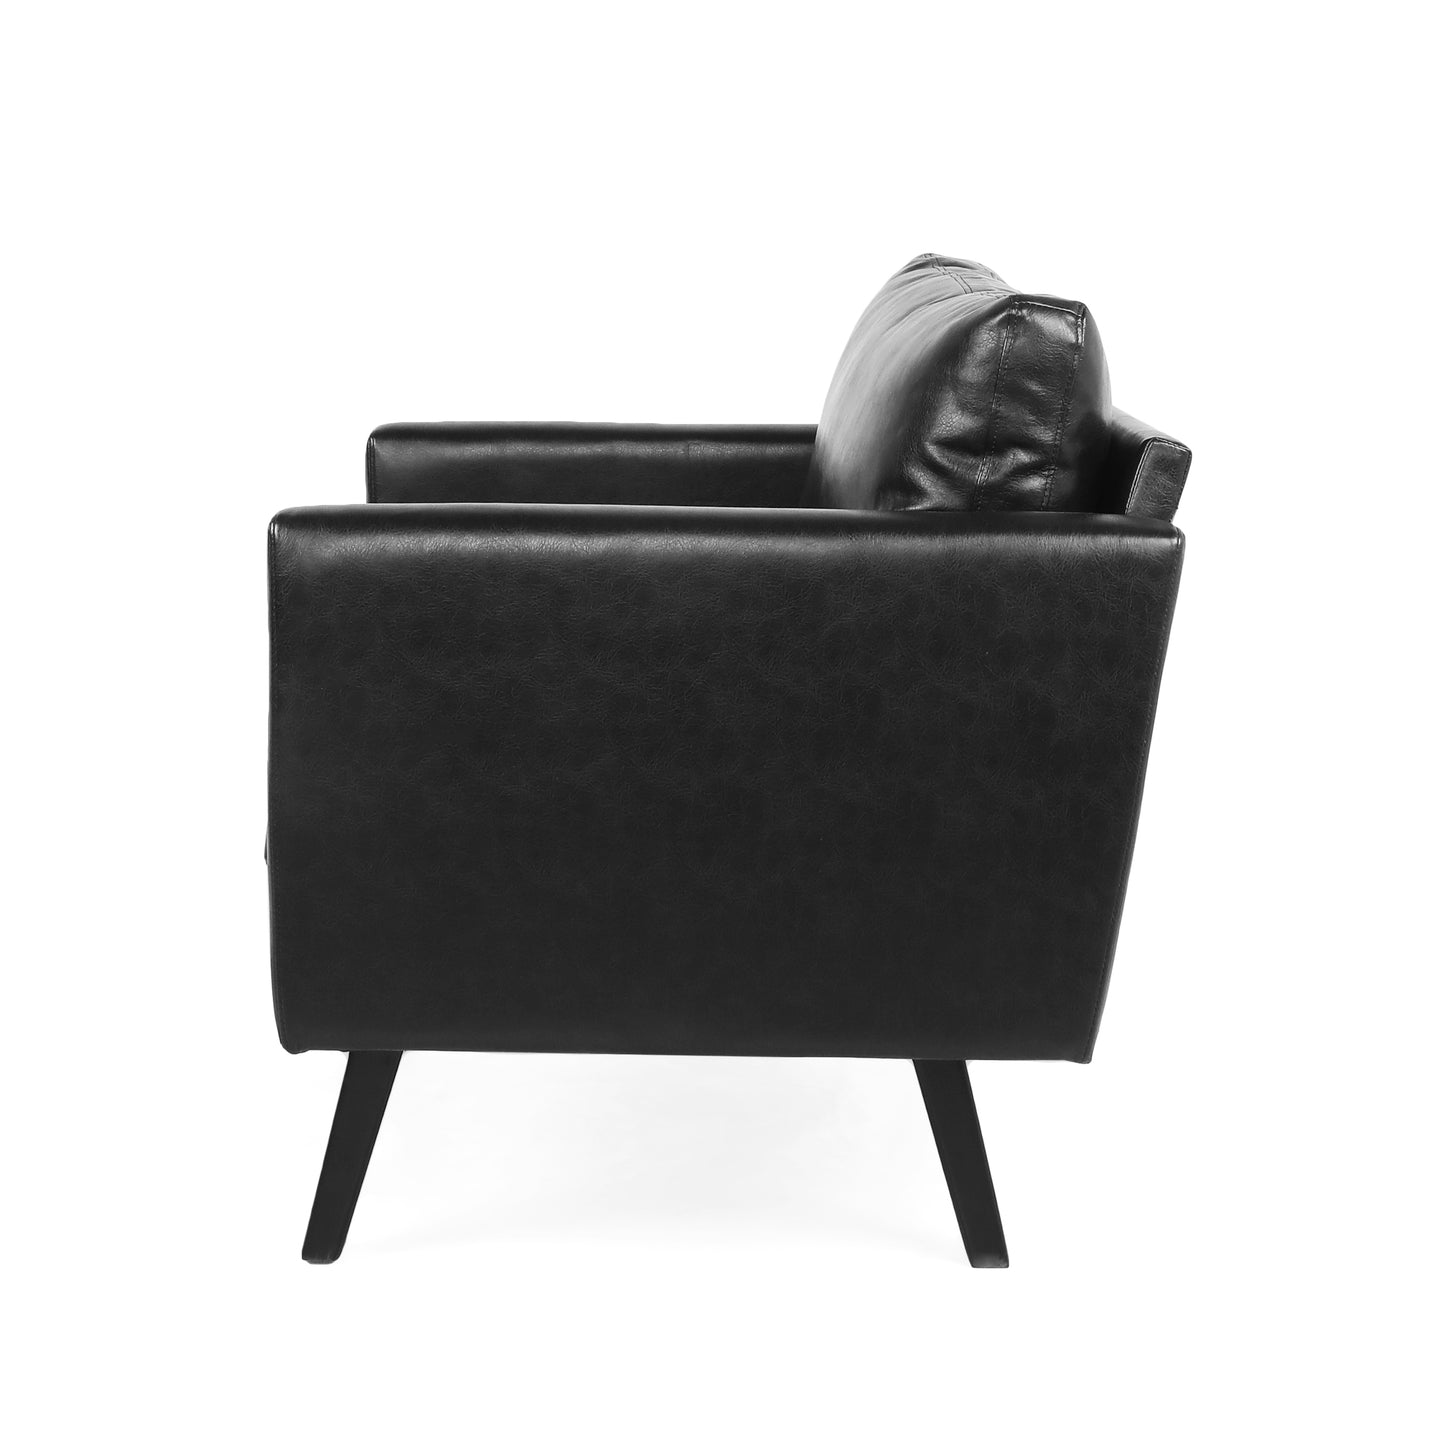 Dowd Mid Century Modern Faux Leather Club Chair